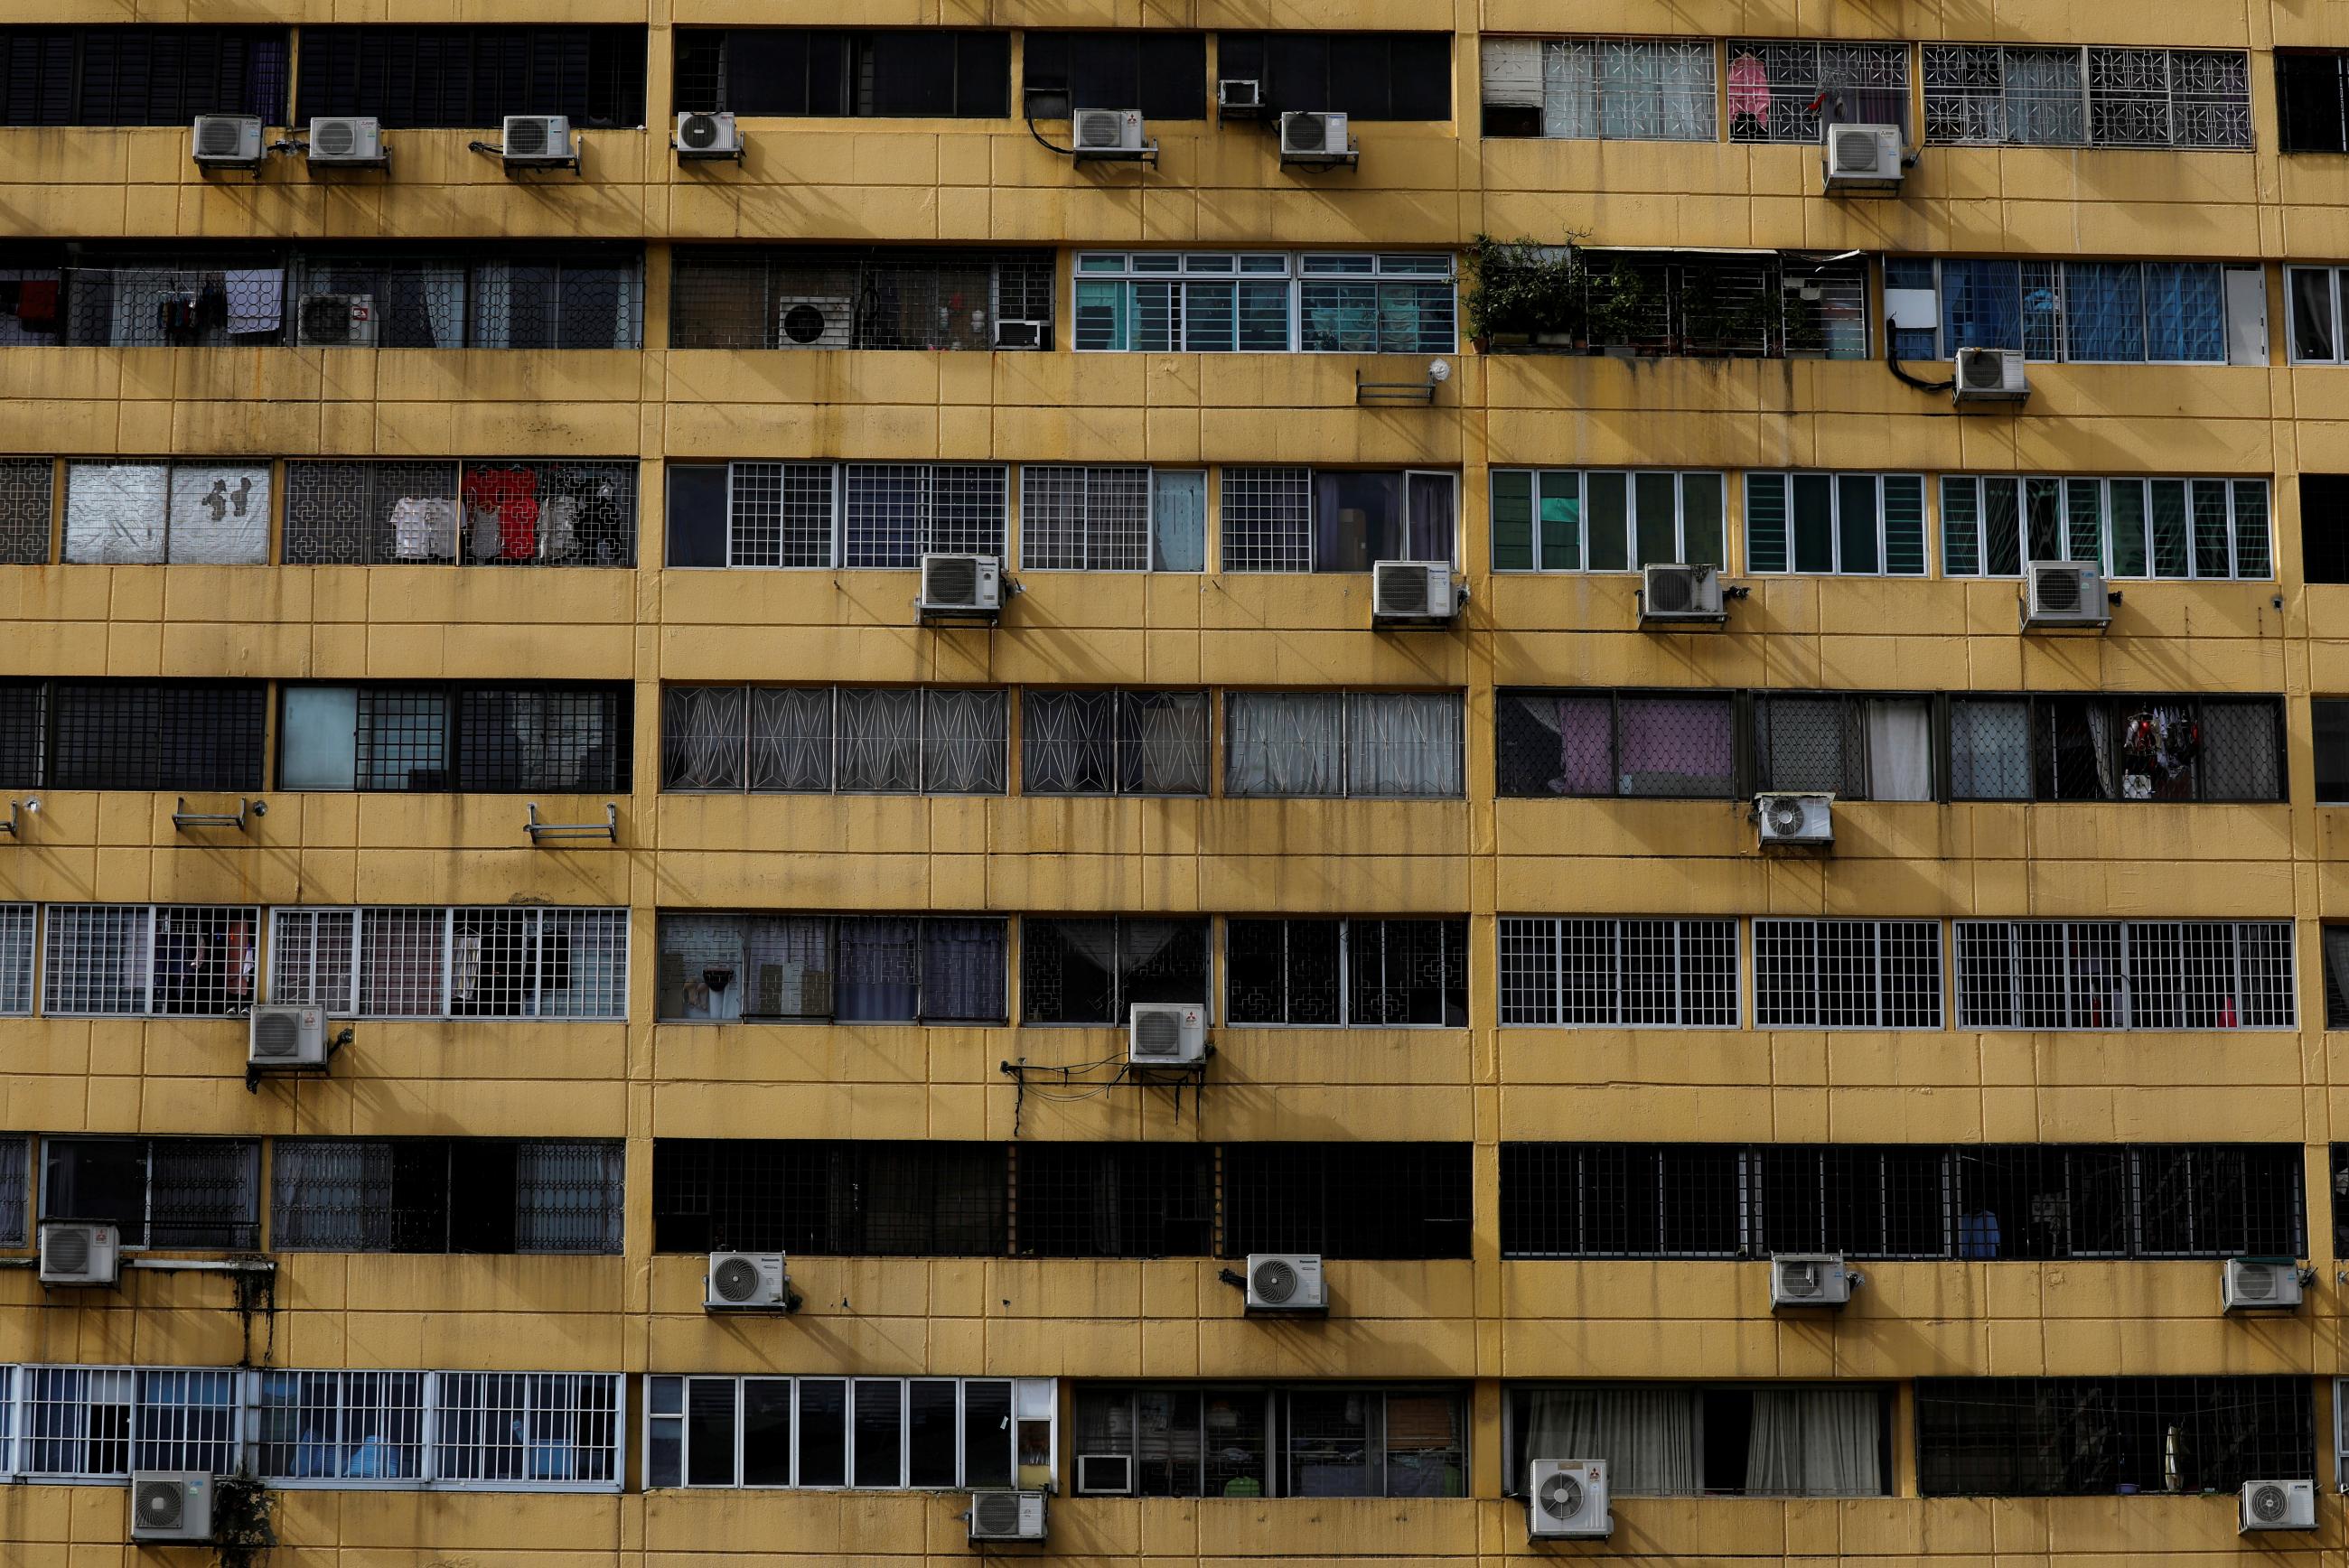 Air-conditioning units dot the facade of People's Park Complex condominium in Singapore, January 5, 2021